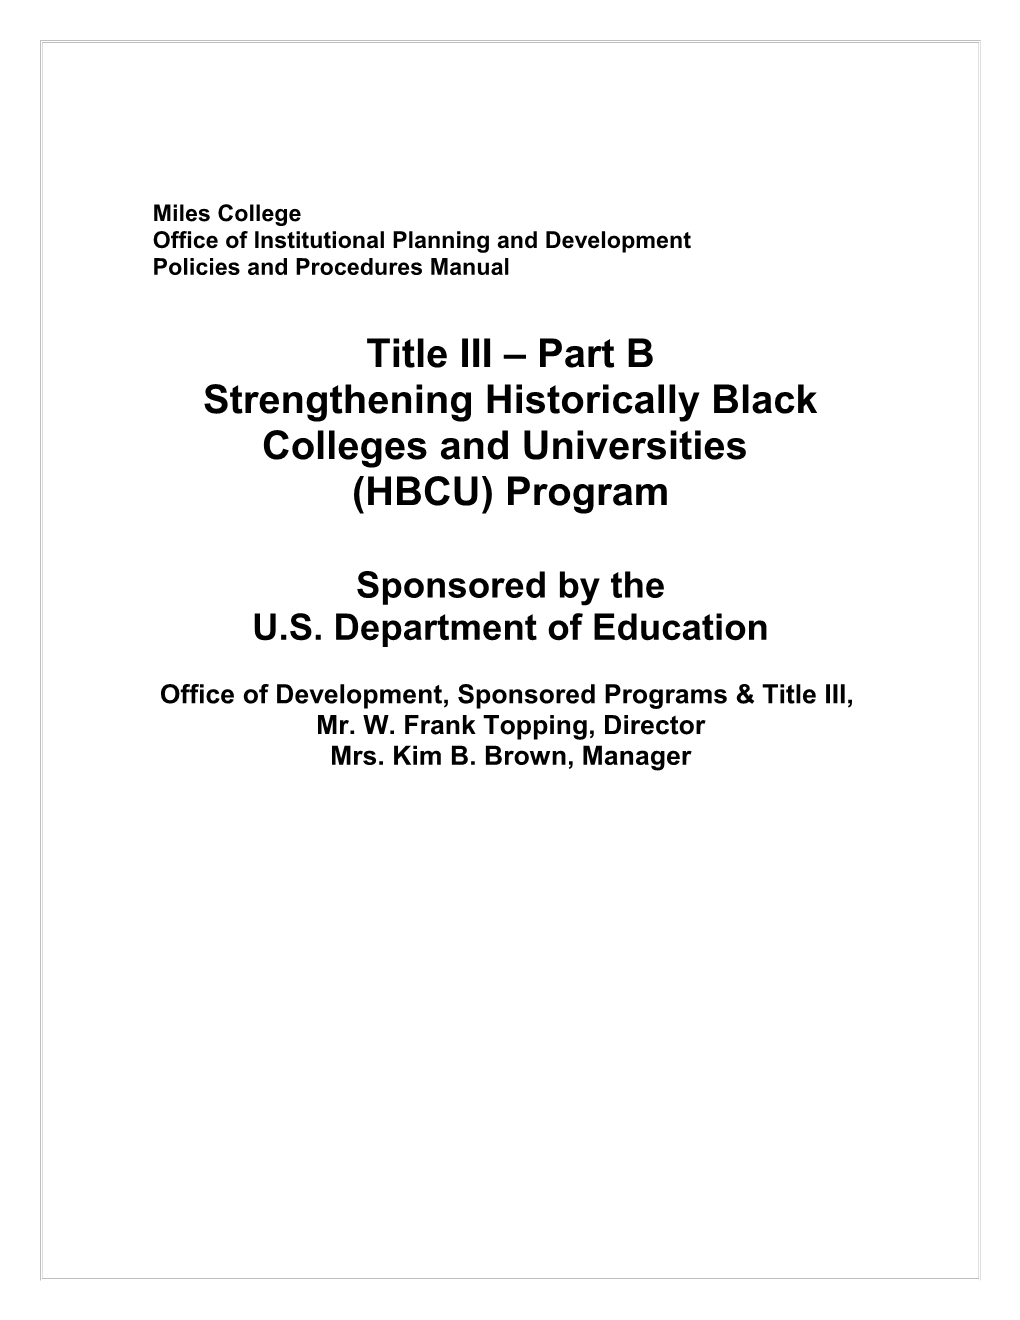 An Overview of Title Iii Program